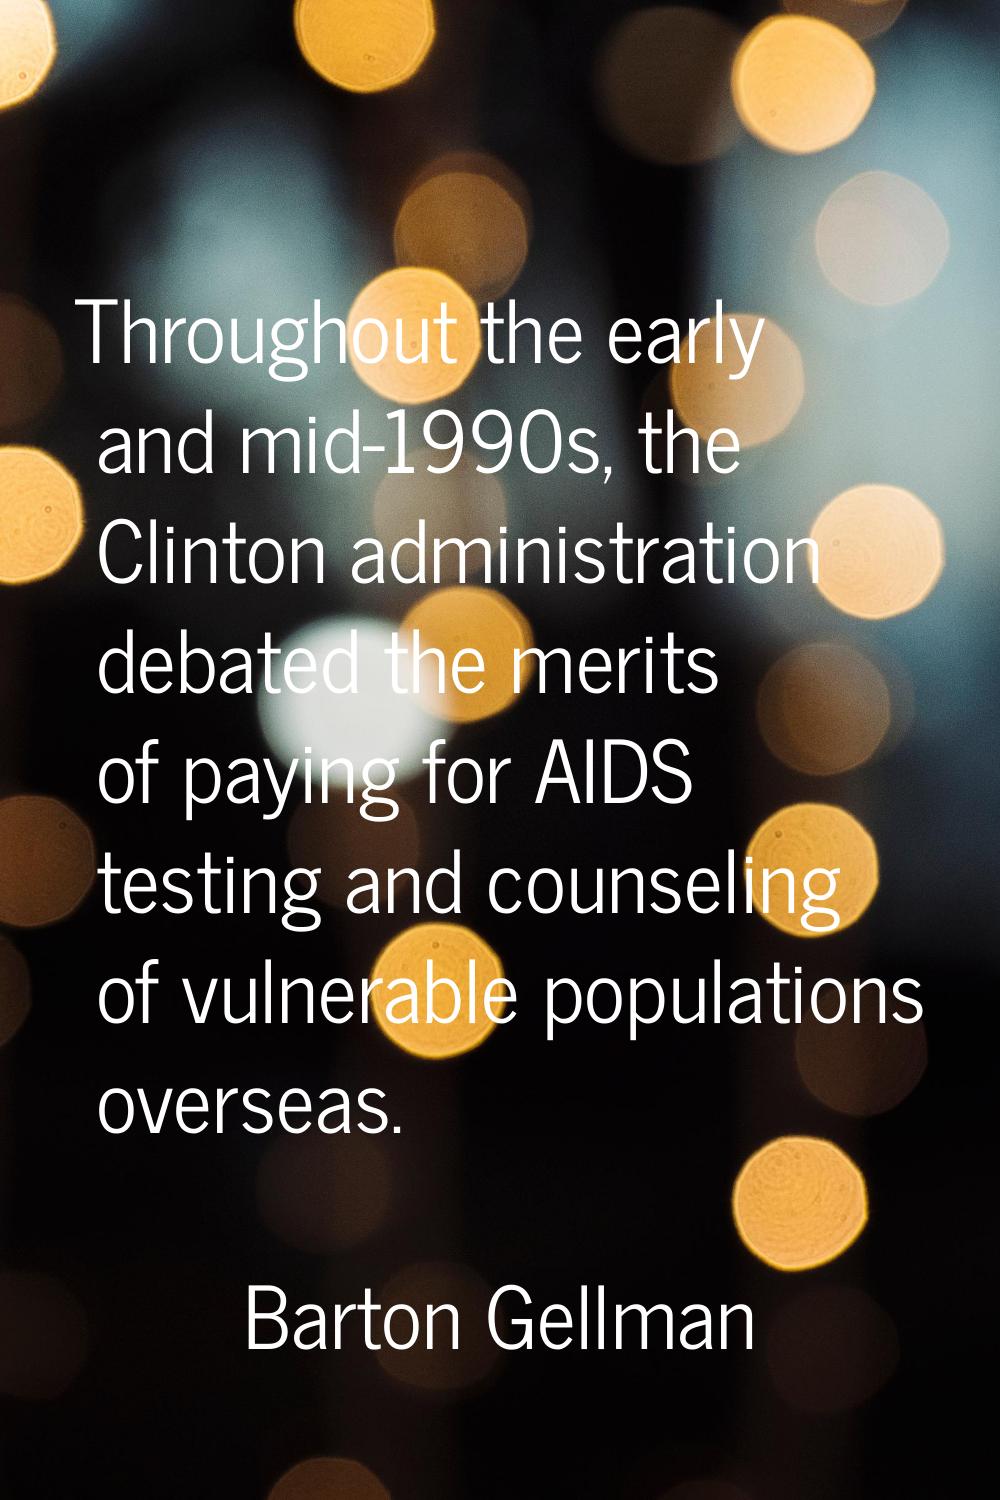 Throughout the early and mid-1990s, the Clinton administration debated the merits of paying for AID